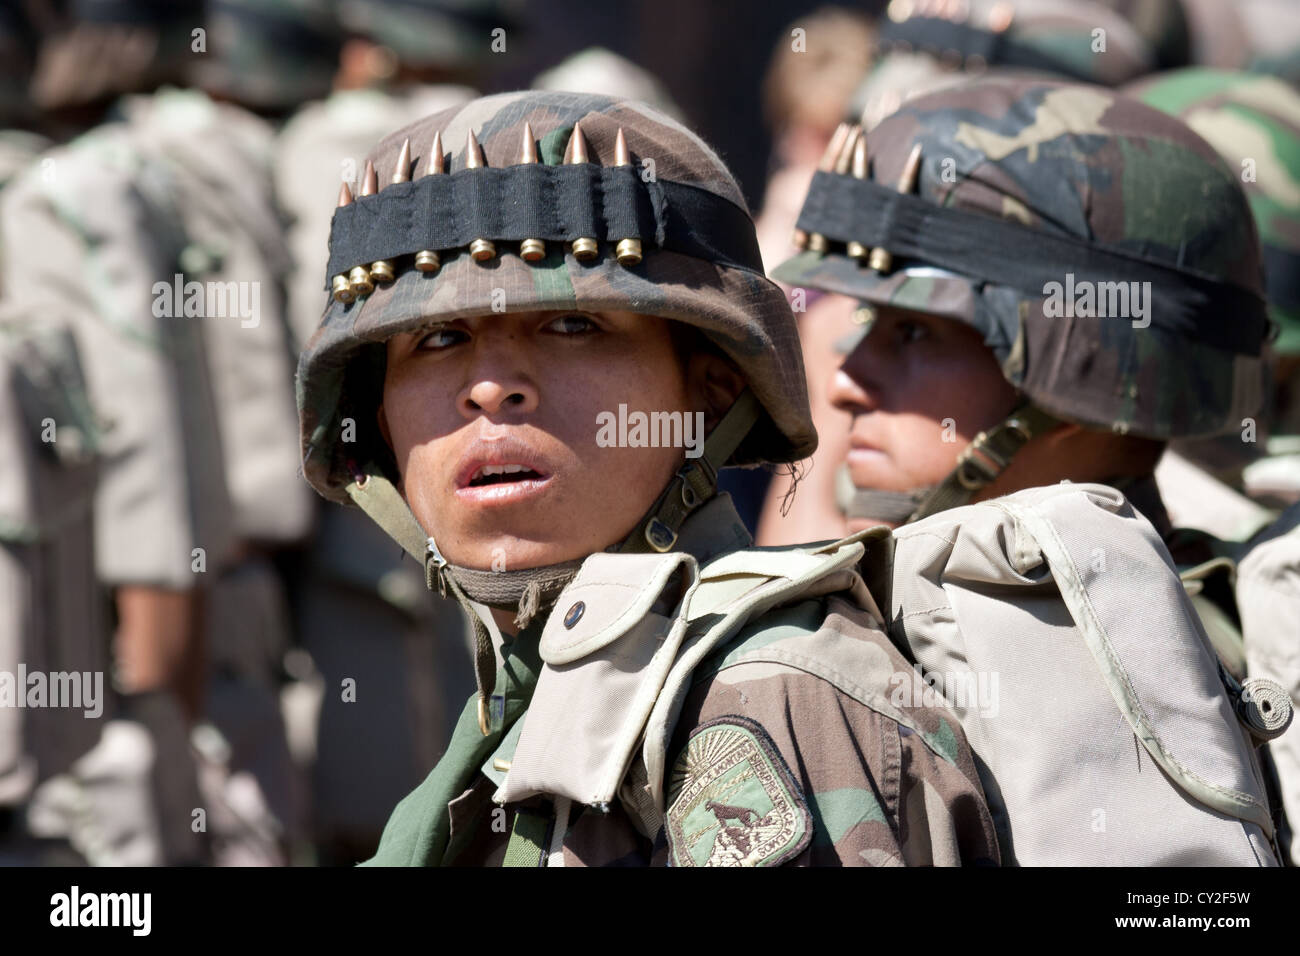 A soldier during a military parade Stock Photo